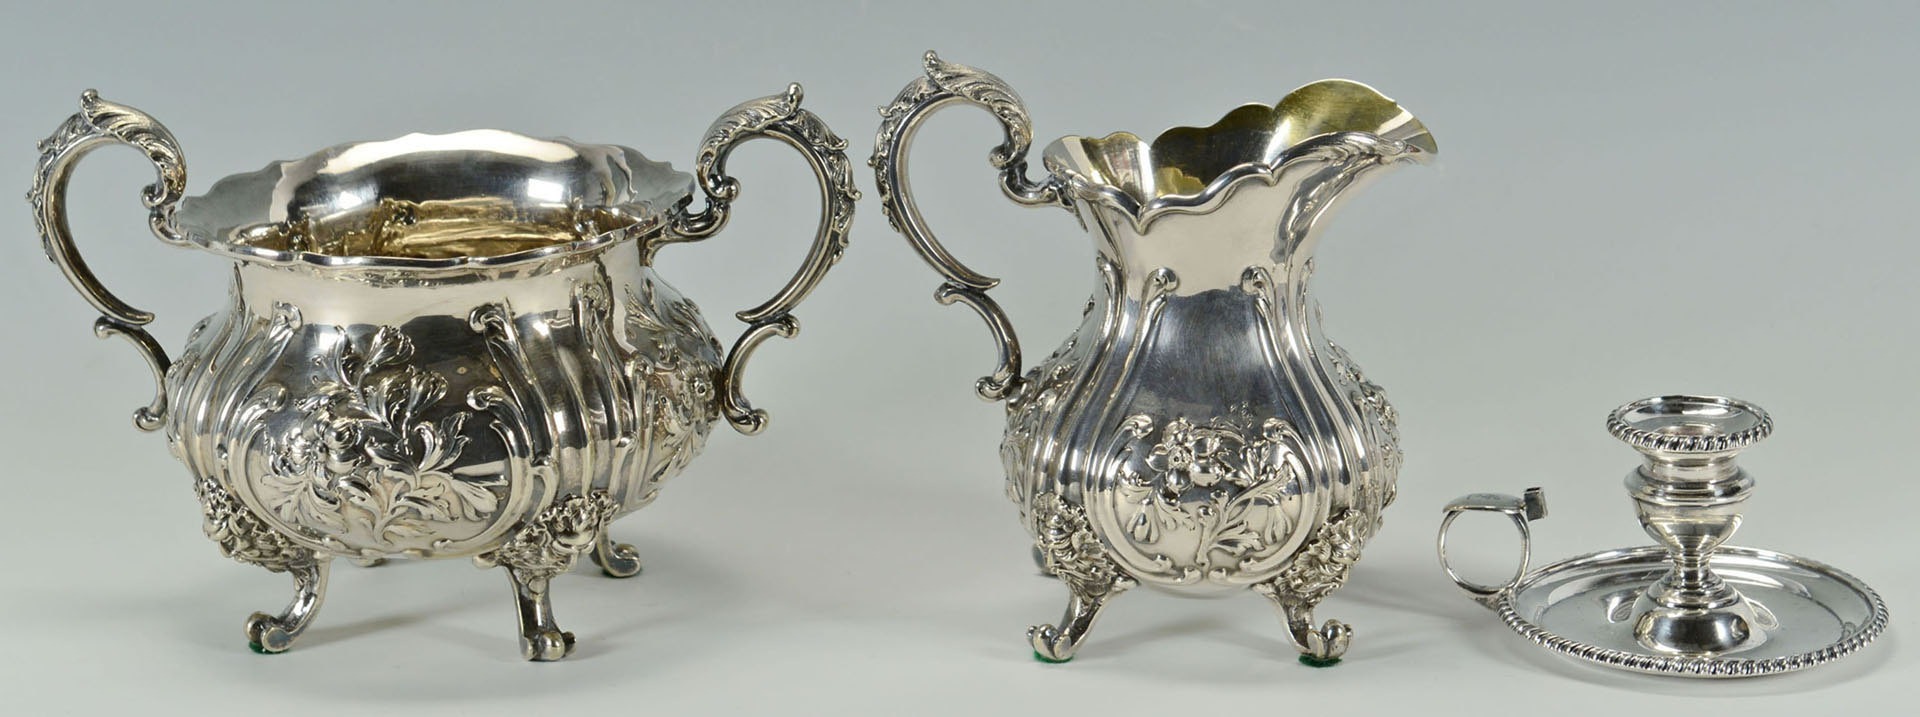 Lot 597: Elkington Tea/Coffee Service, tray and candlestick